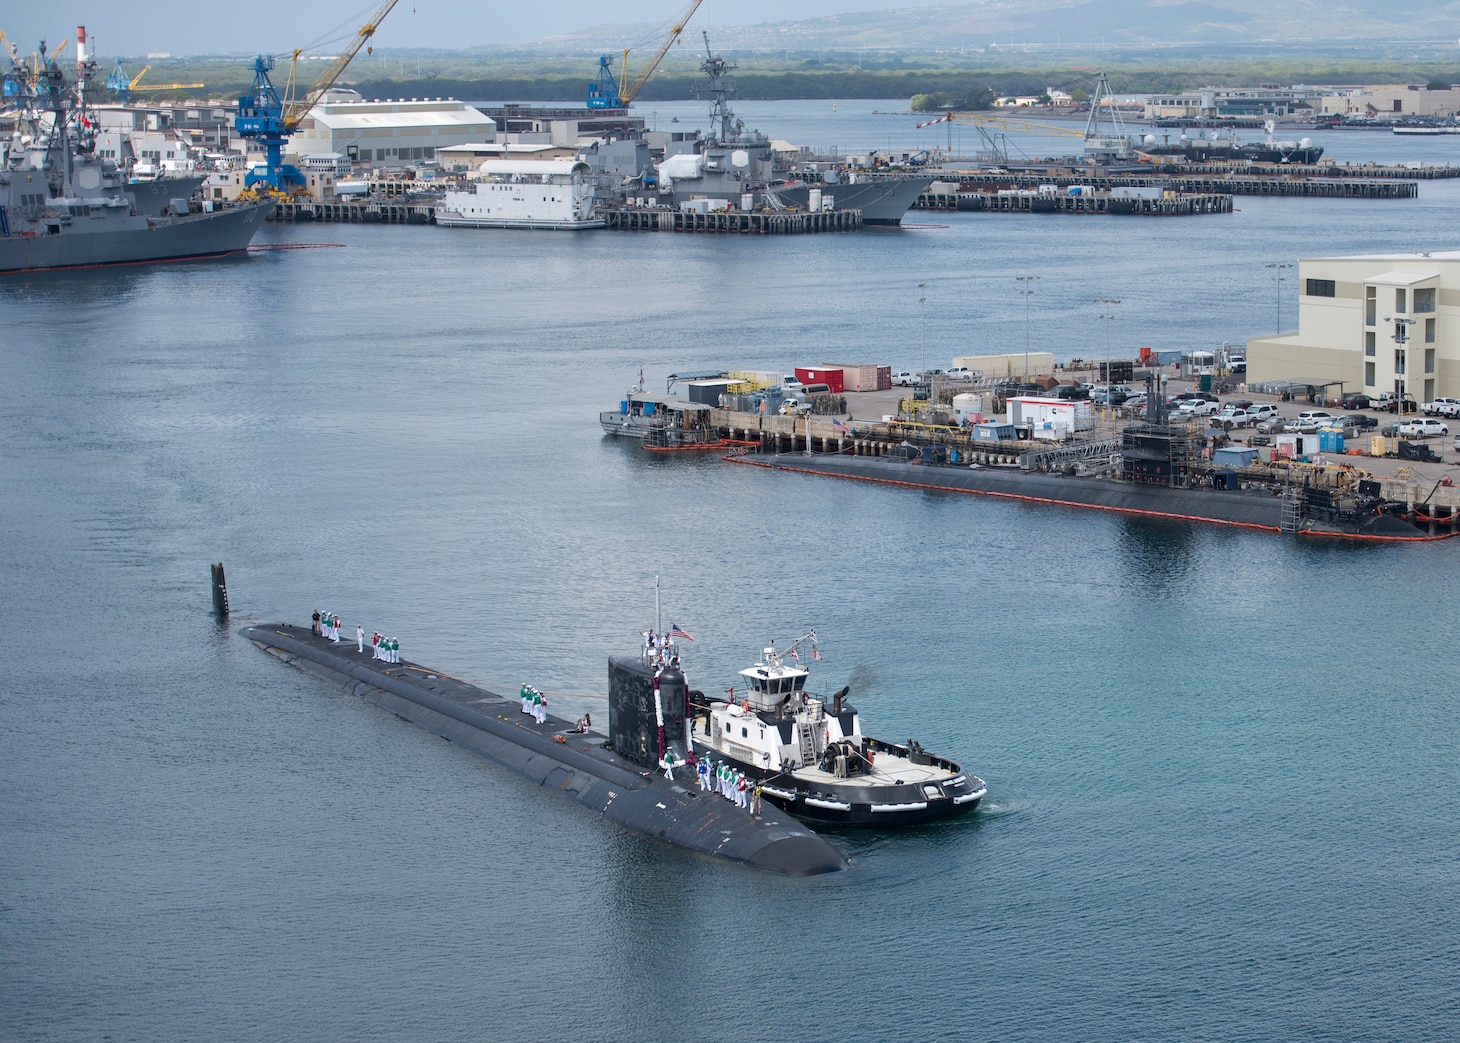 180330-N-LY160-0026 PEARL HARBOR, Hawaii (March 30, 2018) The crew of the Virginia-class fast-attack submarine USS Mississippi (SSN 782) returns to Joint Base Pearl Harbor-Hickam following a six-month Western Pacific deployment, March 30. (U.S. Navy photo by Mass Communication Specialist 2nd Class Michael H. Lee/ Released)